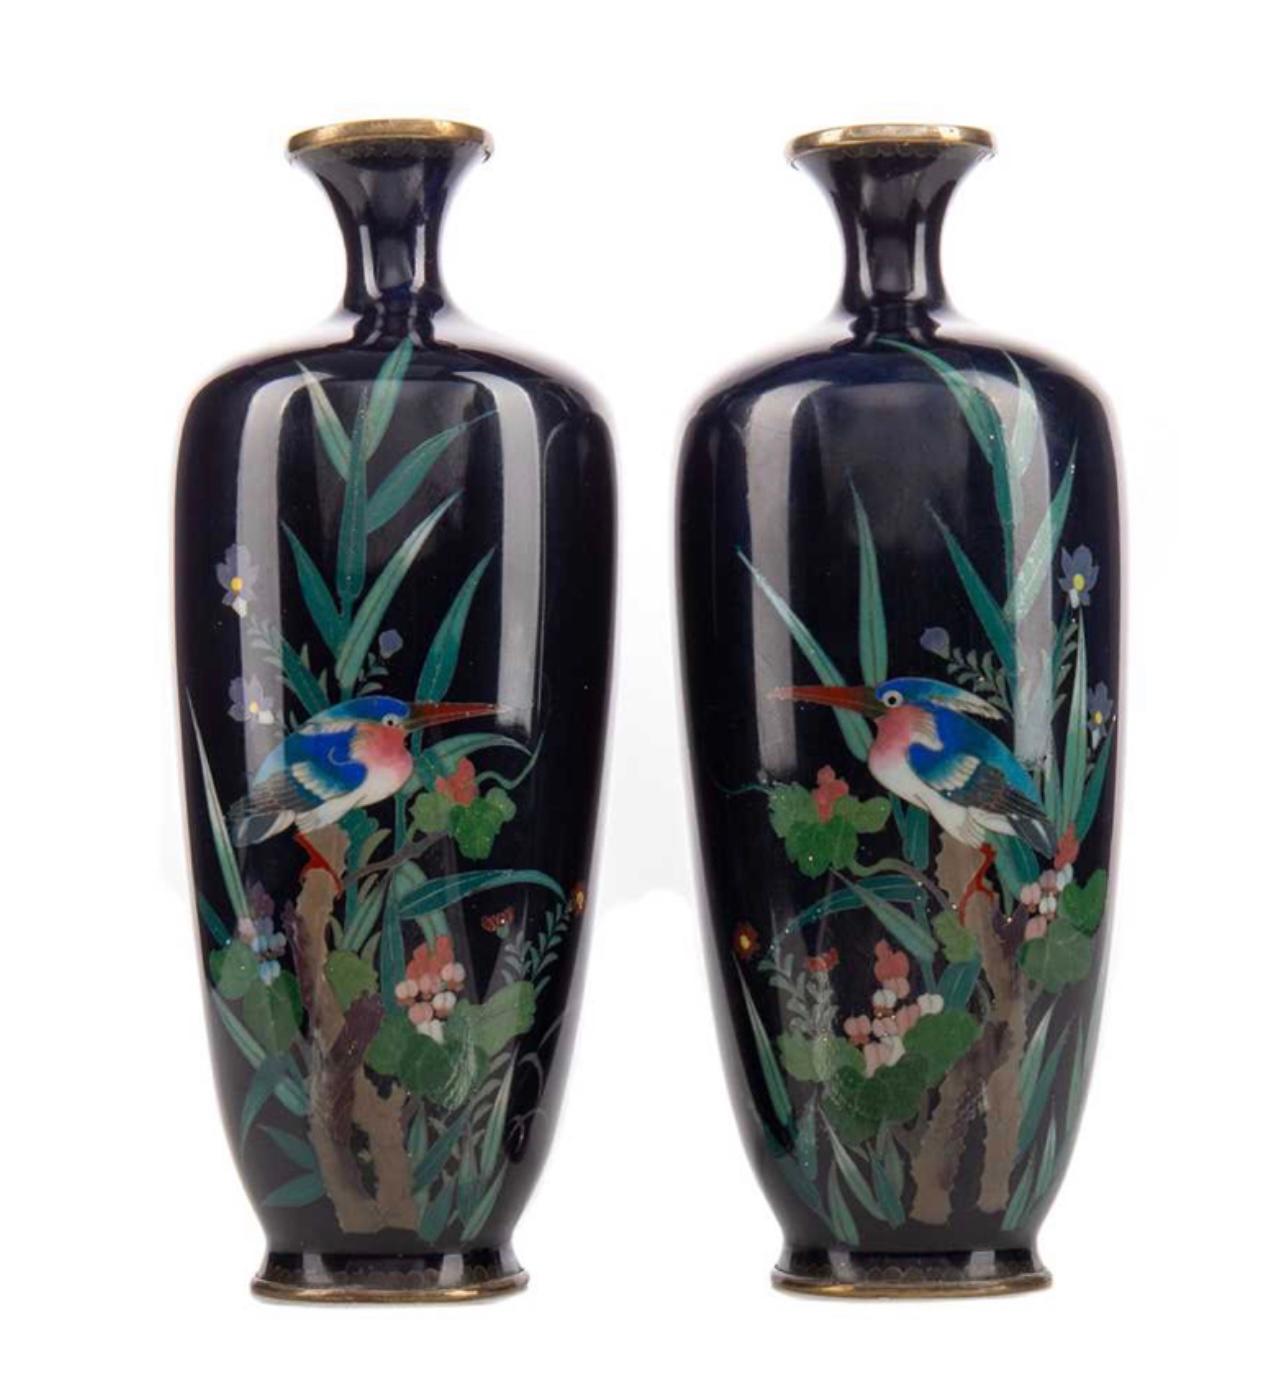 A Fine Opposing Pair of Japanese Cloisonne Enamel Vases. 19th Century.

OPPOSING PAIR OF JAPANESE CLOISONNE ENAMEL VASES, Meiji Period (1868-1912), worked in silver wire and decorated with a kingfisher perched amongst flowers and leaves, against a